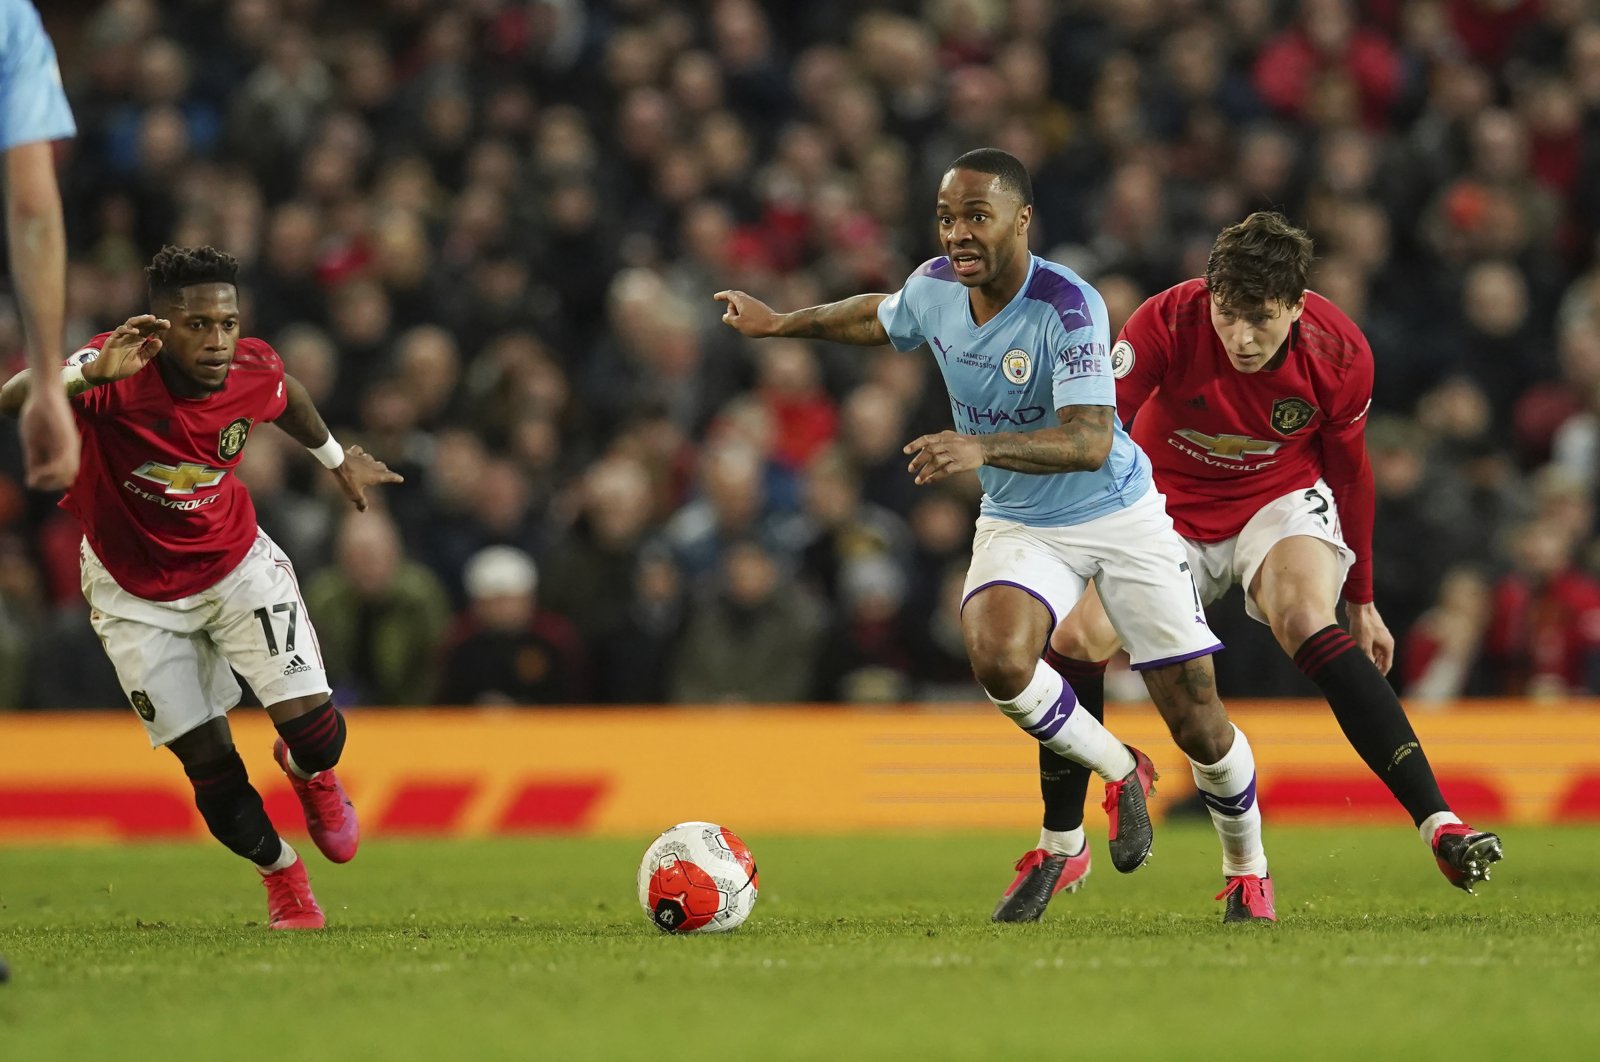 Manchester City's Raheem Sterling (C) and Manchester United's Victor Lindelof (R) compete for the ball during a Premier League match in Manchester, England, March 8, 2020. (AP Photo)